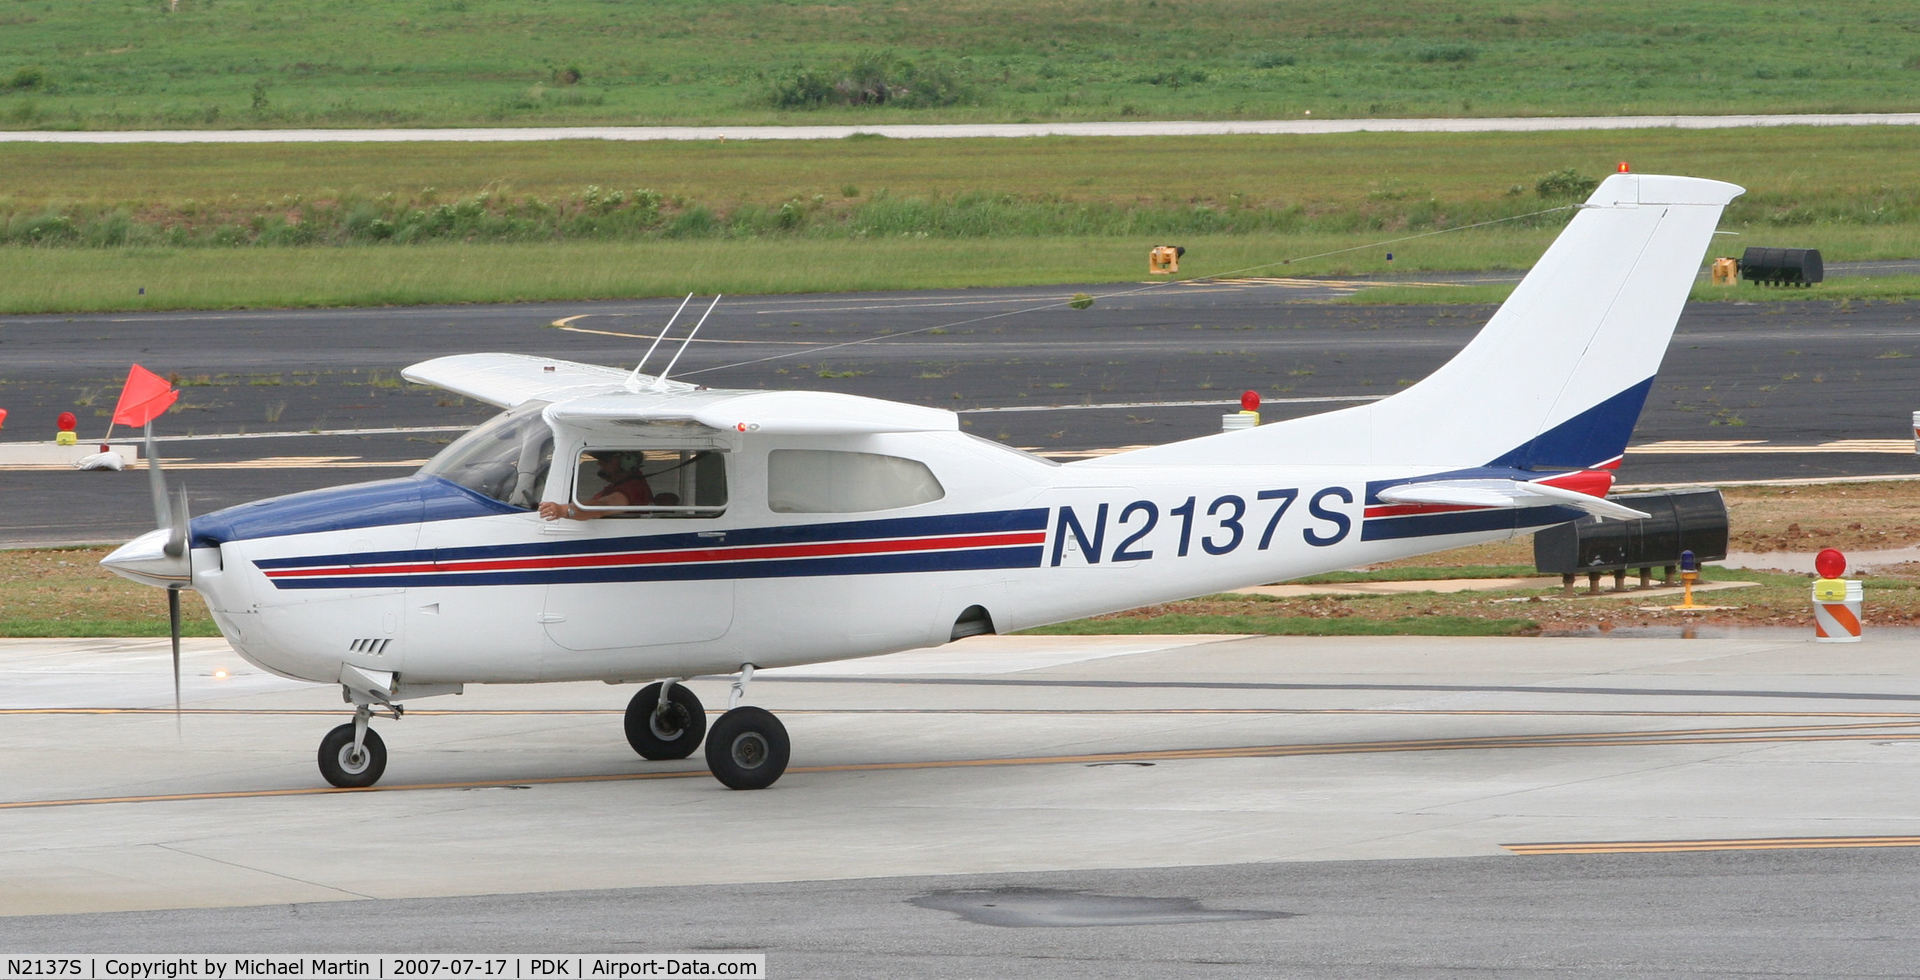 N2137S, 1975 Cessna 210L Centurion C/N 21061098, Flight Express 560 Taxing to Epps Air Service